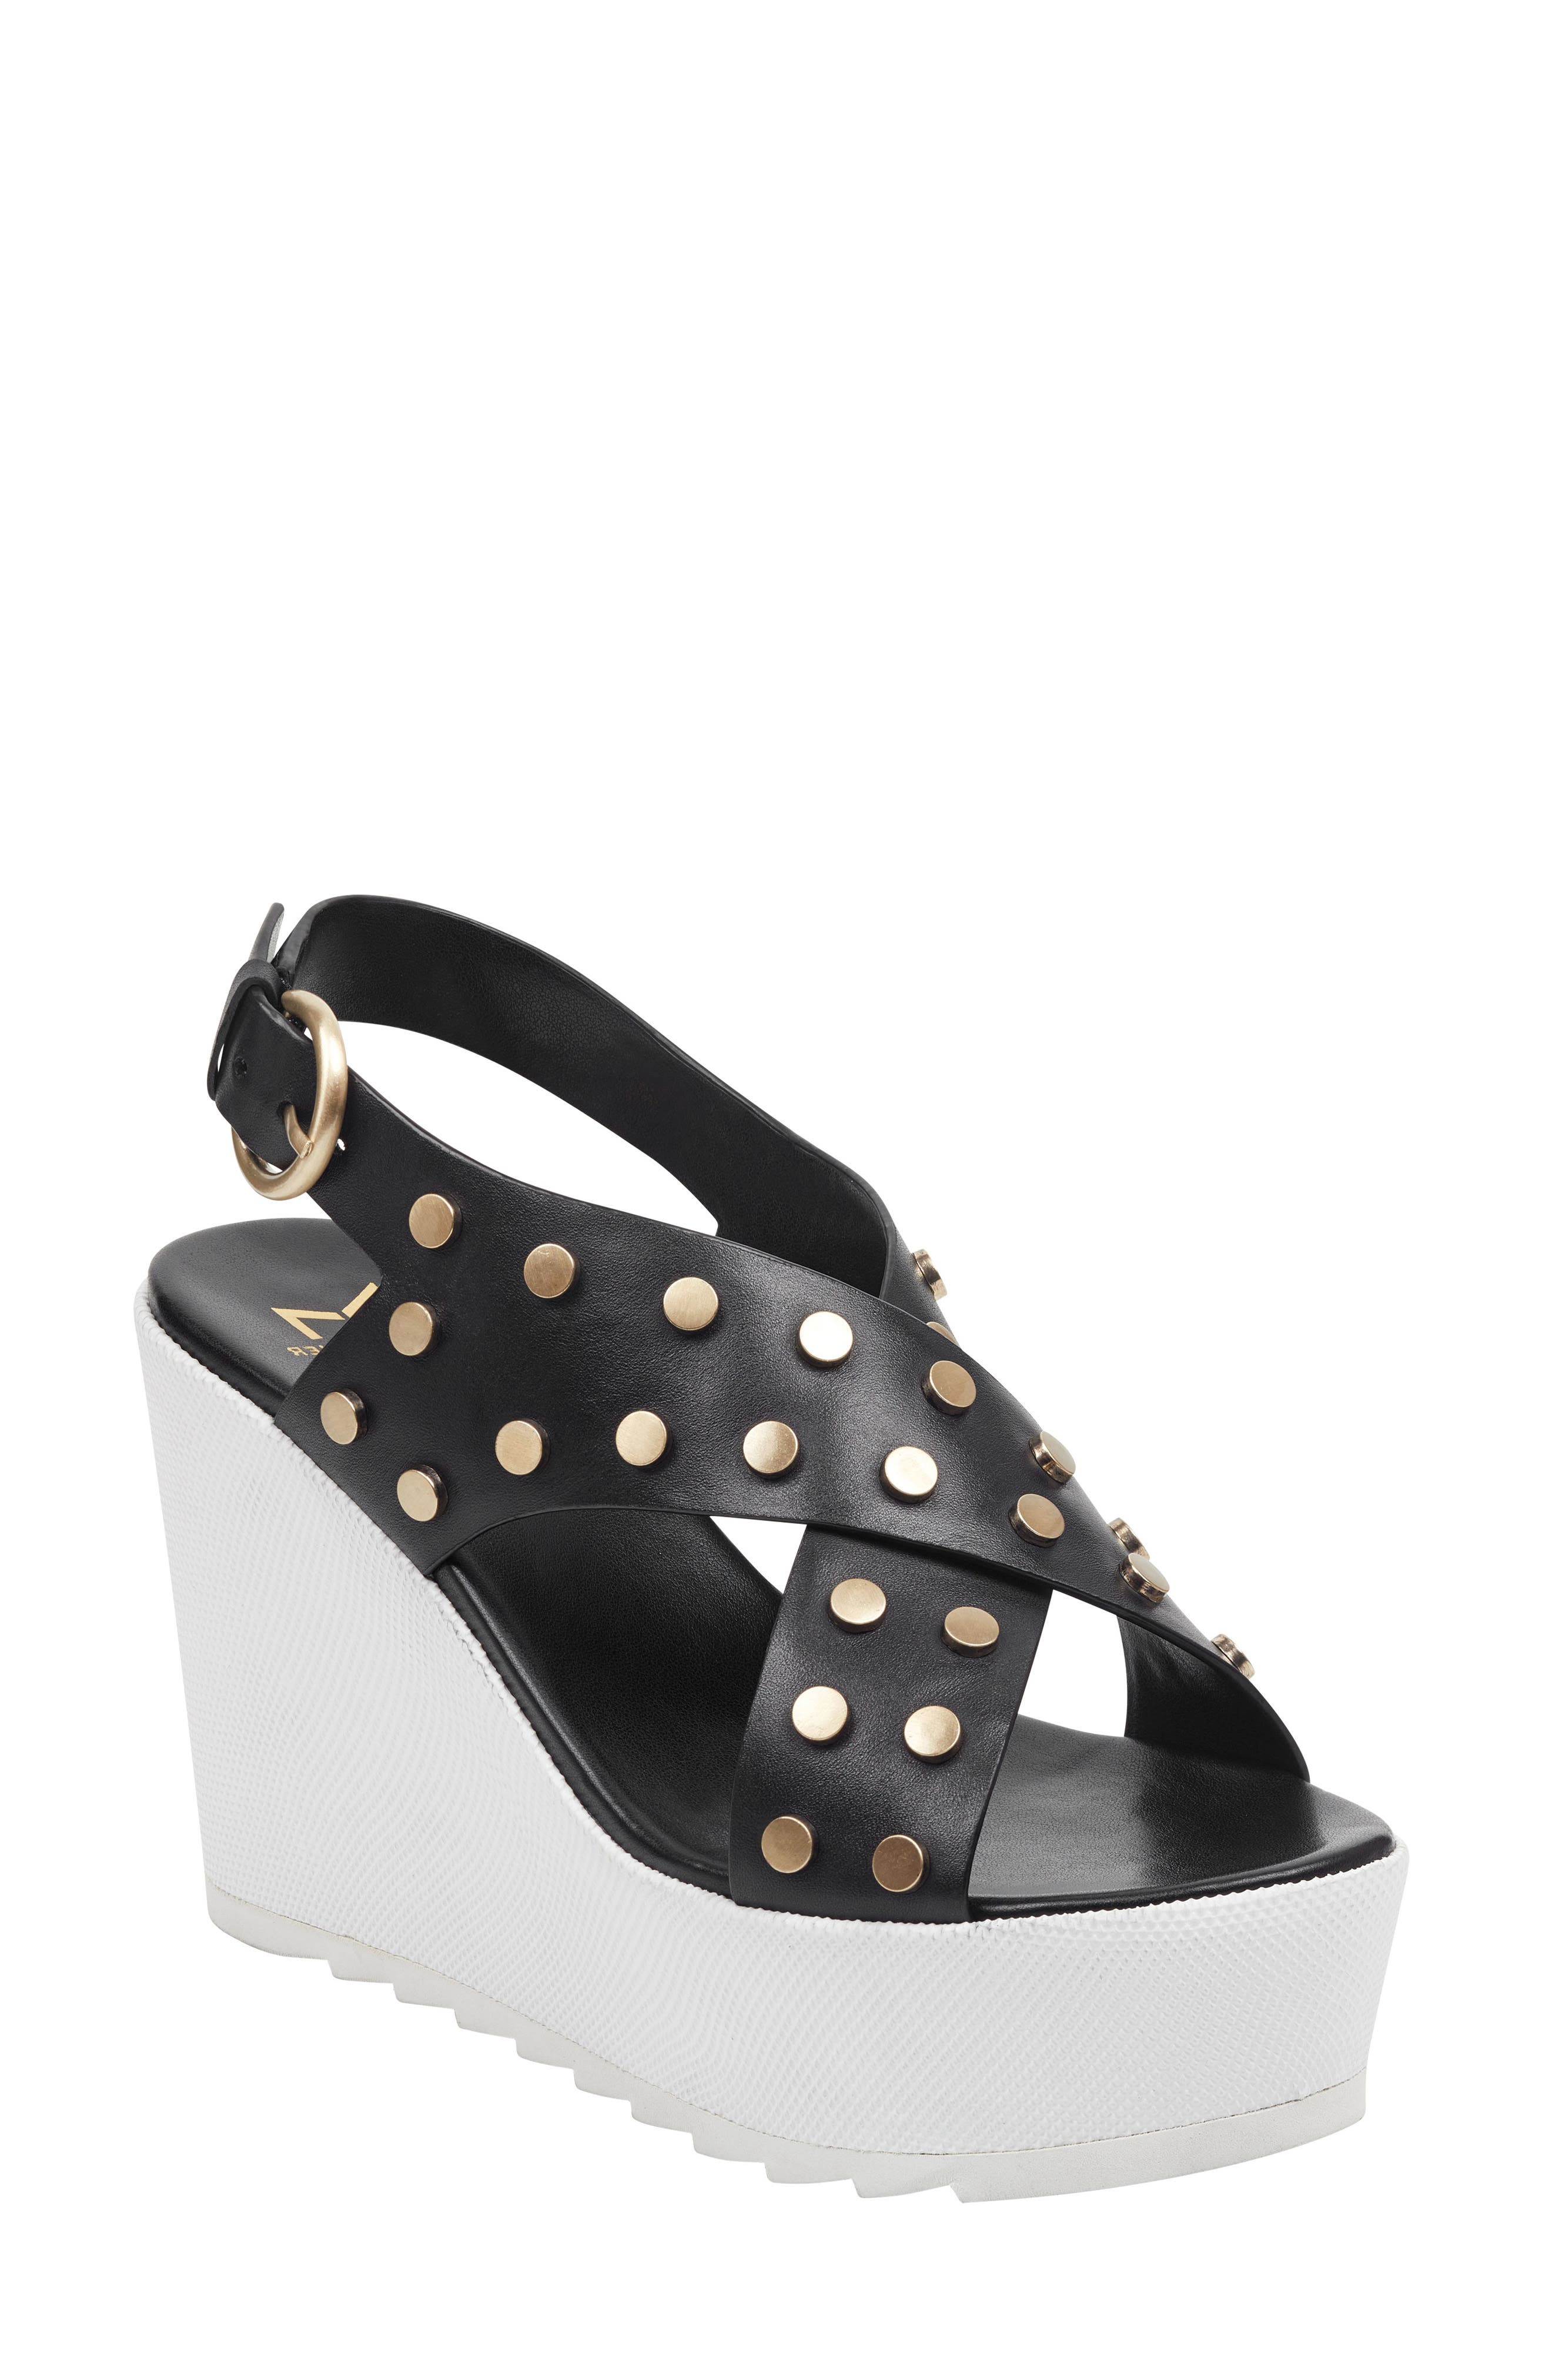 marc fisher studded wedges